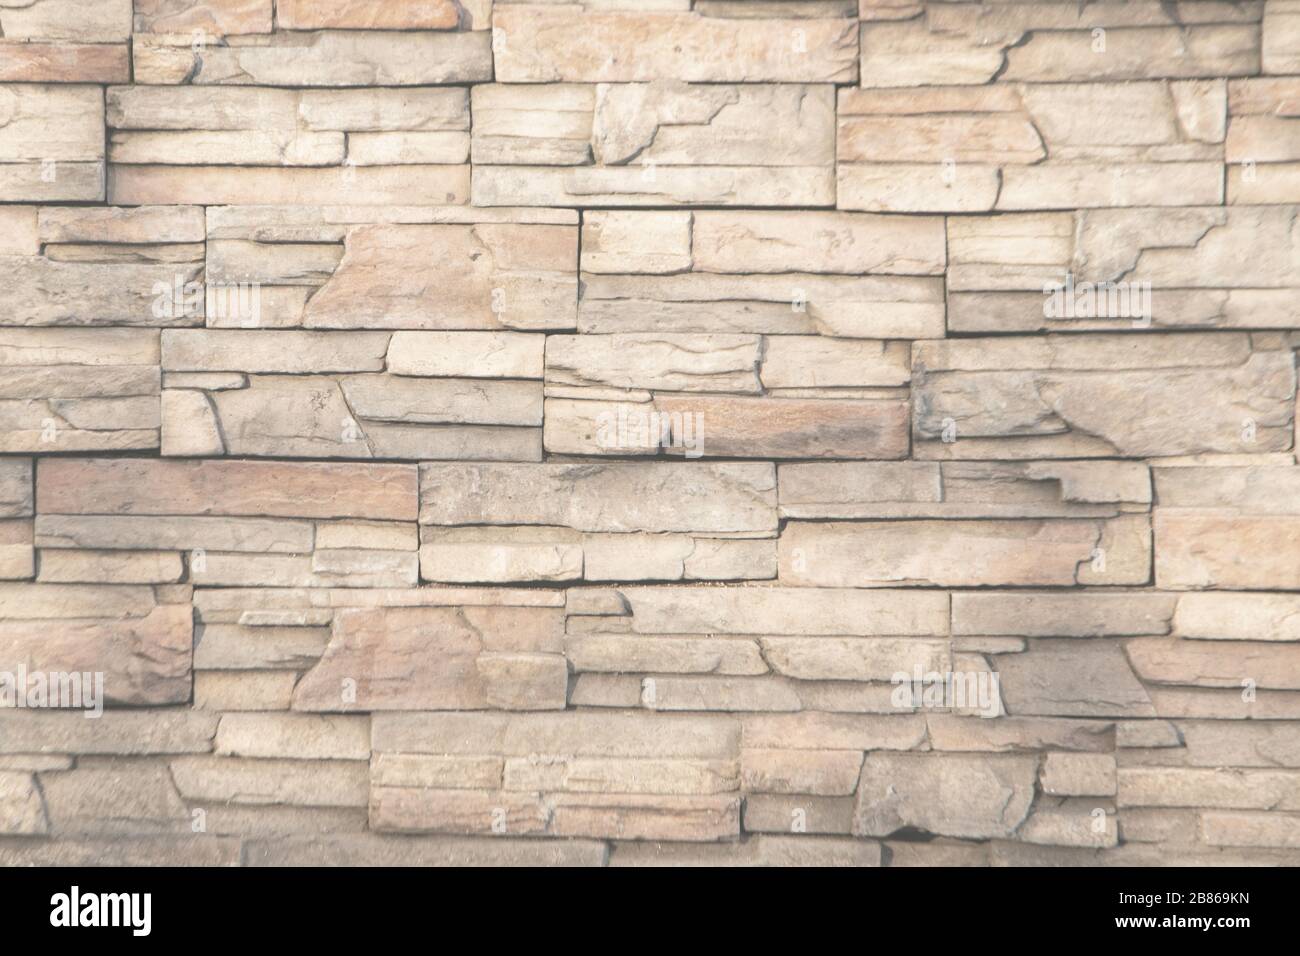 Brick wall texture or brick wall background For exterior decoration and  design for building construction concepts Stock Photo - Alamy